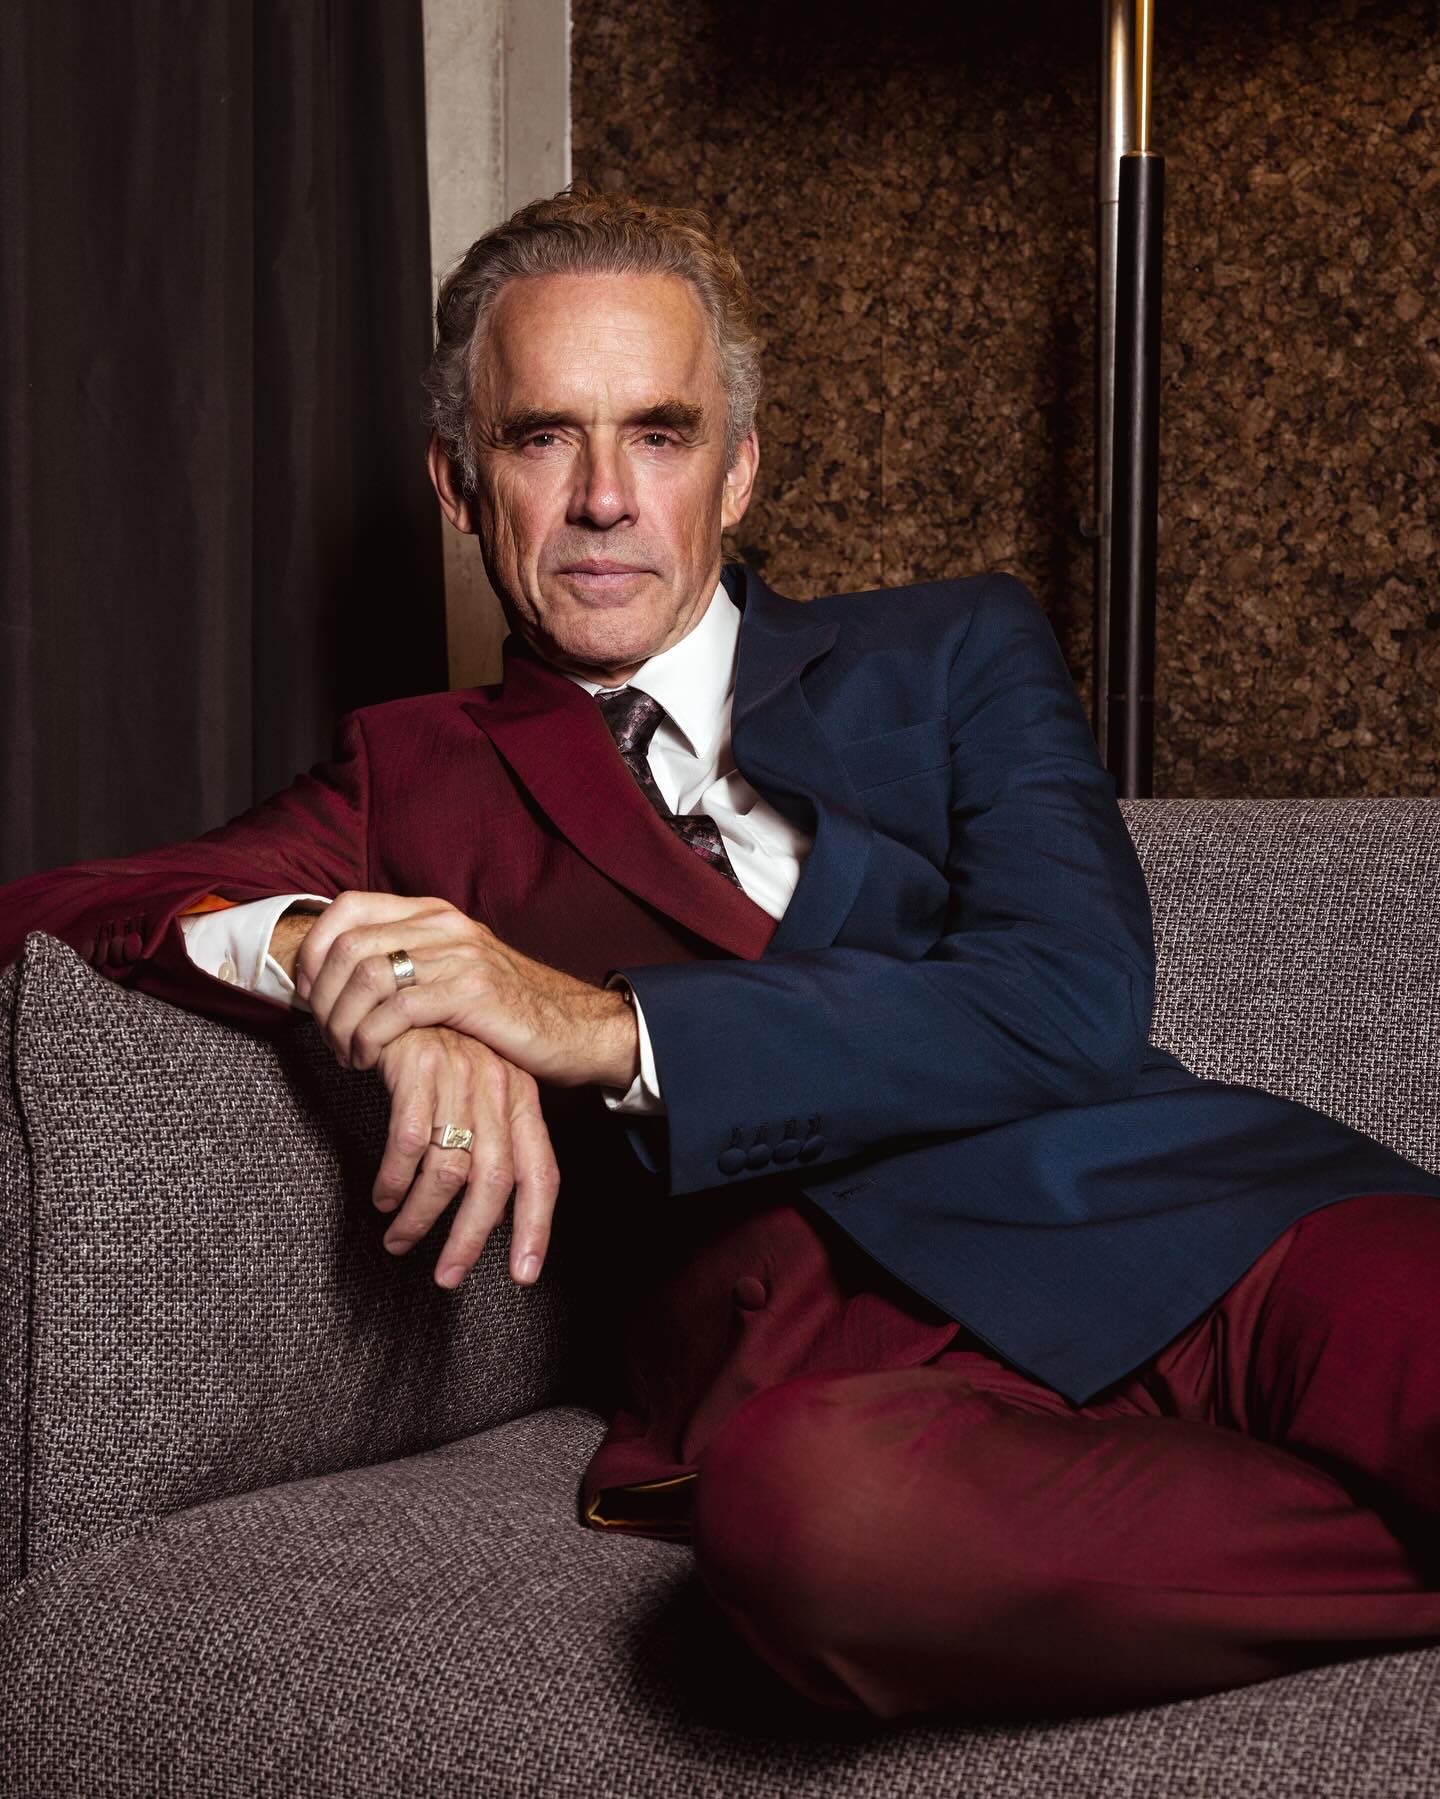 Jordan Peterson Biography: Children, Net Worth, Wife, Age, Books, Religion, Courses, Personality Test